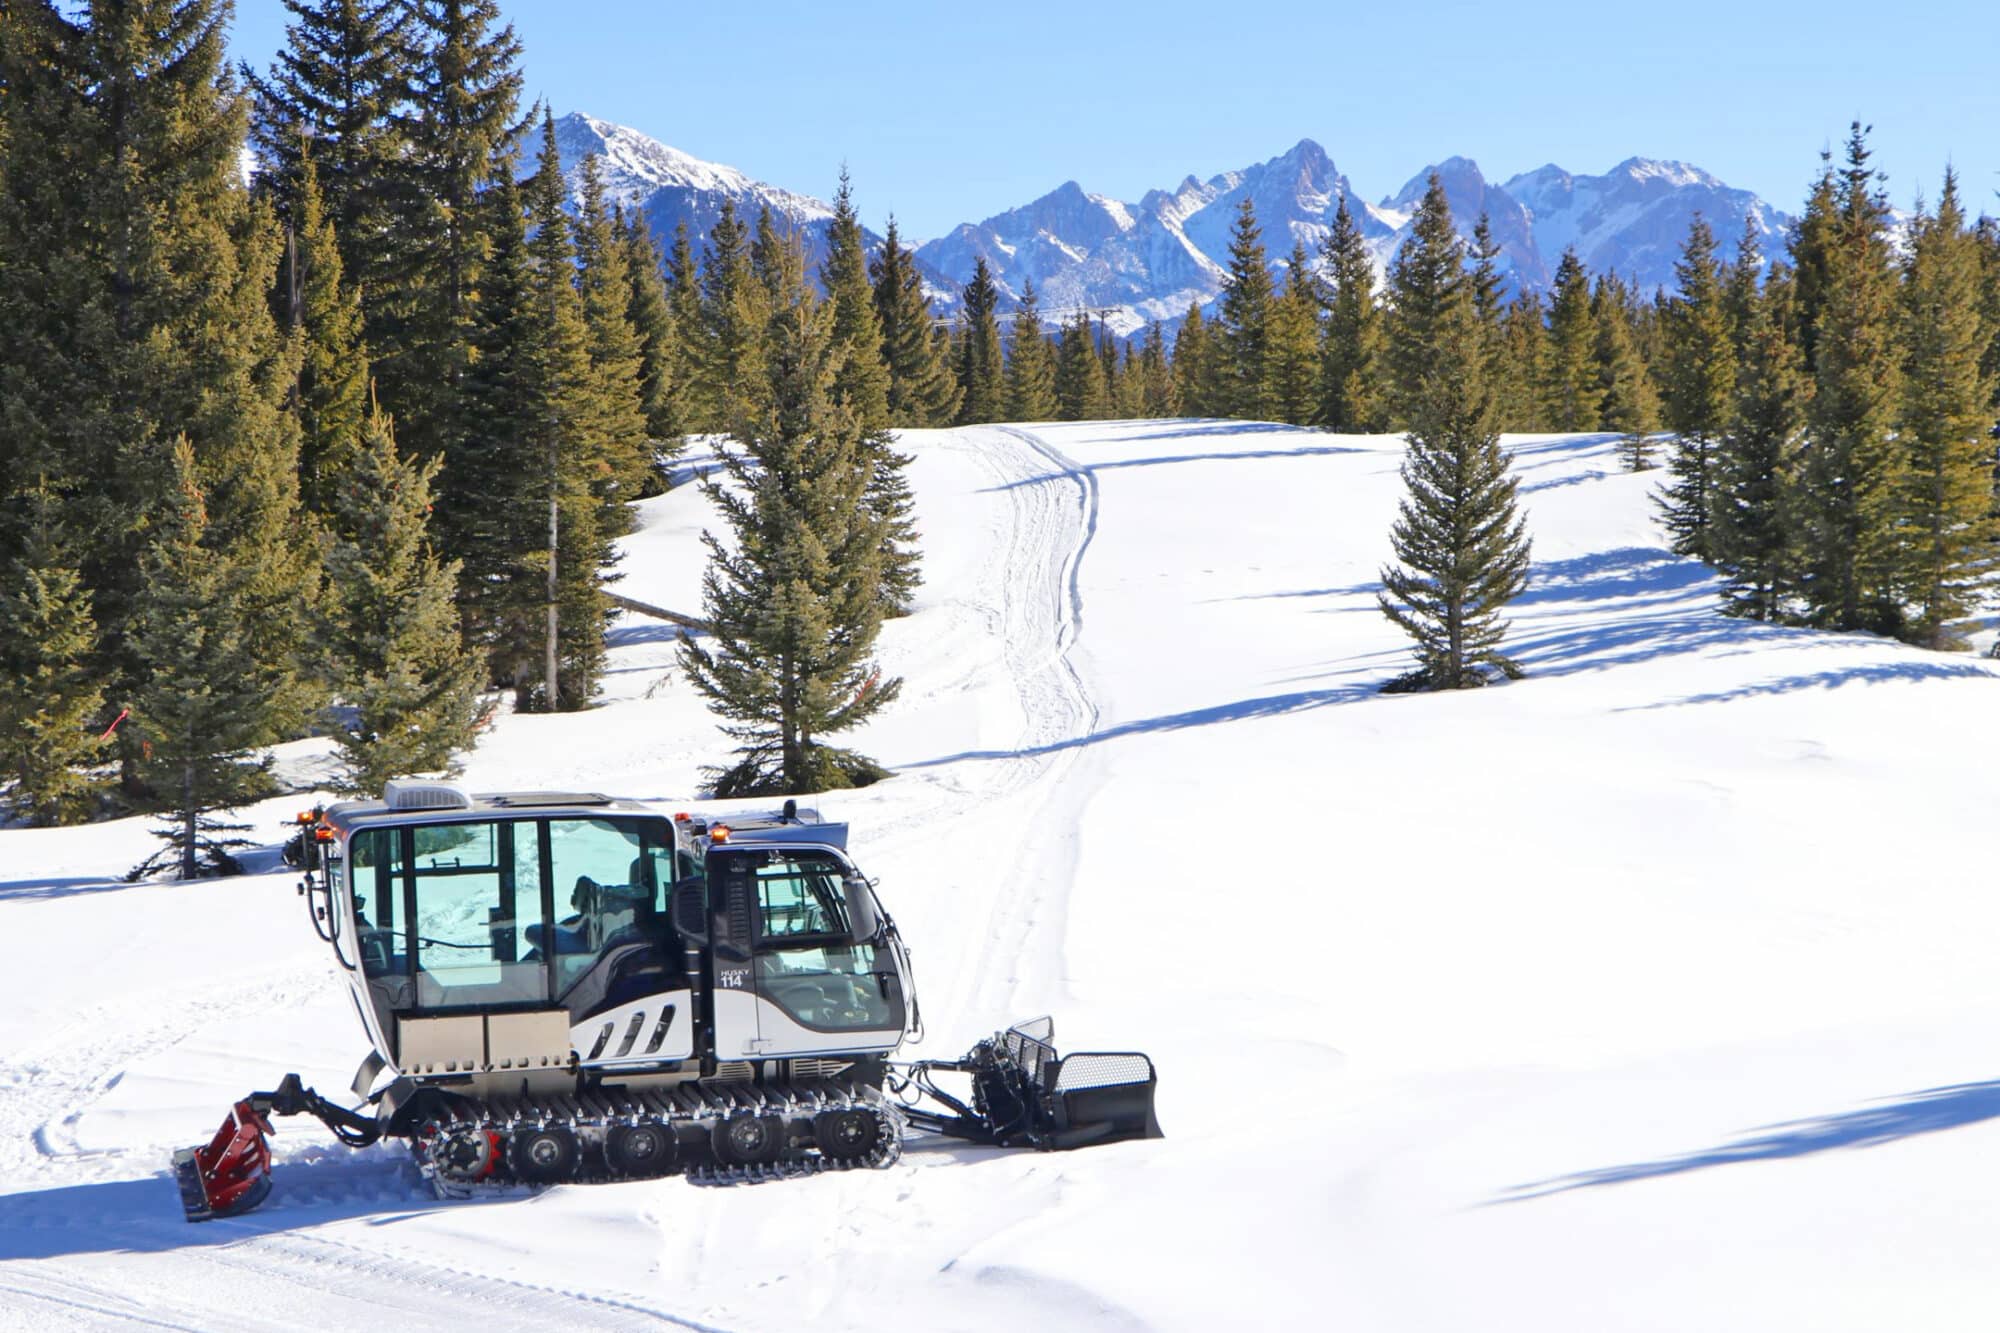 New scenic snowcat sitting in its natural habitat in the backcountry of Purgatory Resort